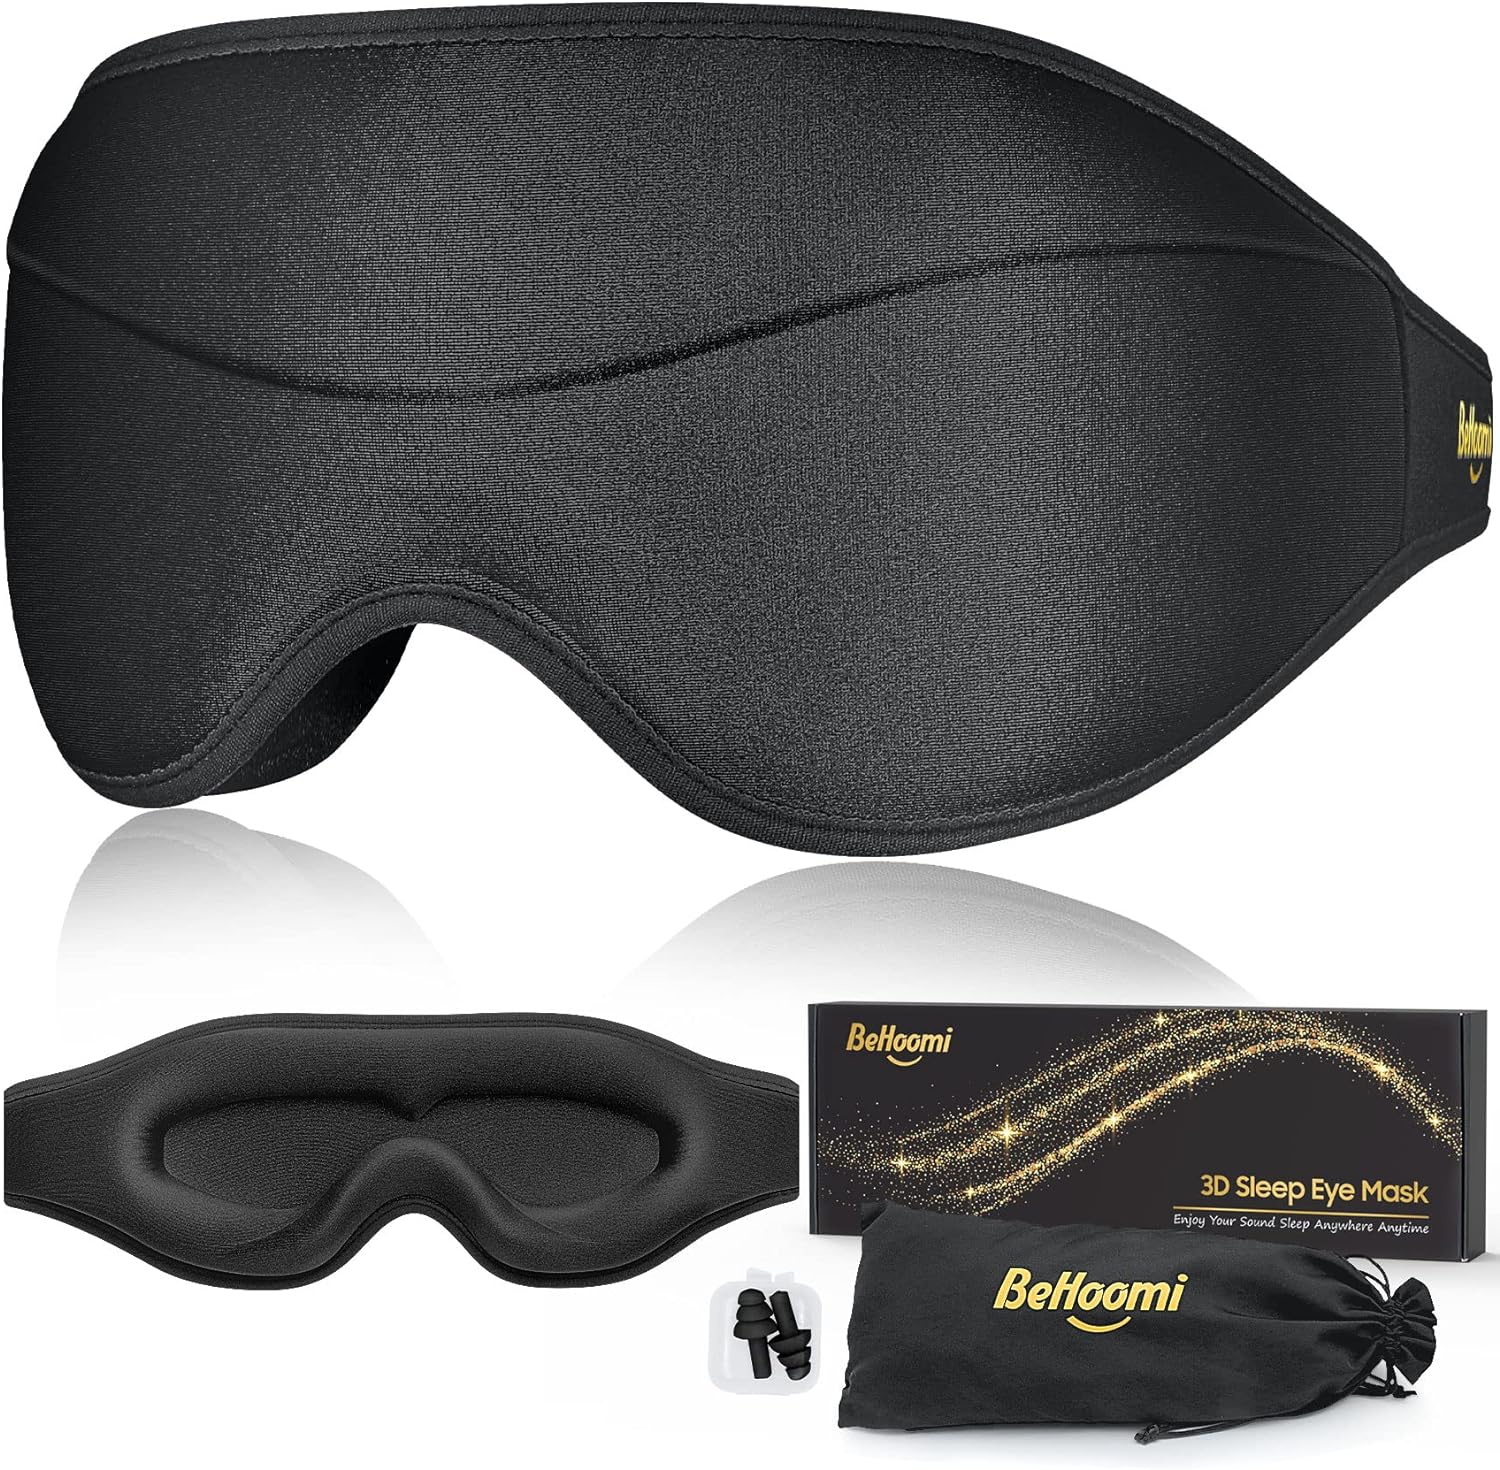 Its a little bulky for side sleepers, but Ive learned how to get comfortable with it. Its worth it, comfortable to wear, padding around the eyes so it does not touch your eyelashes and it molds around the eyes and nose perfectly so no light gets in. I definitely get a much better sleep wearing this.